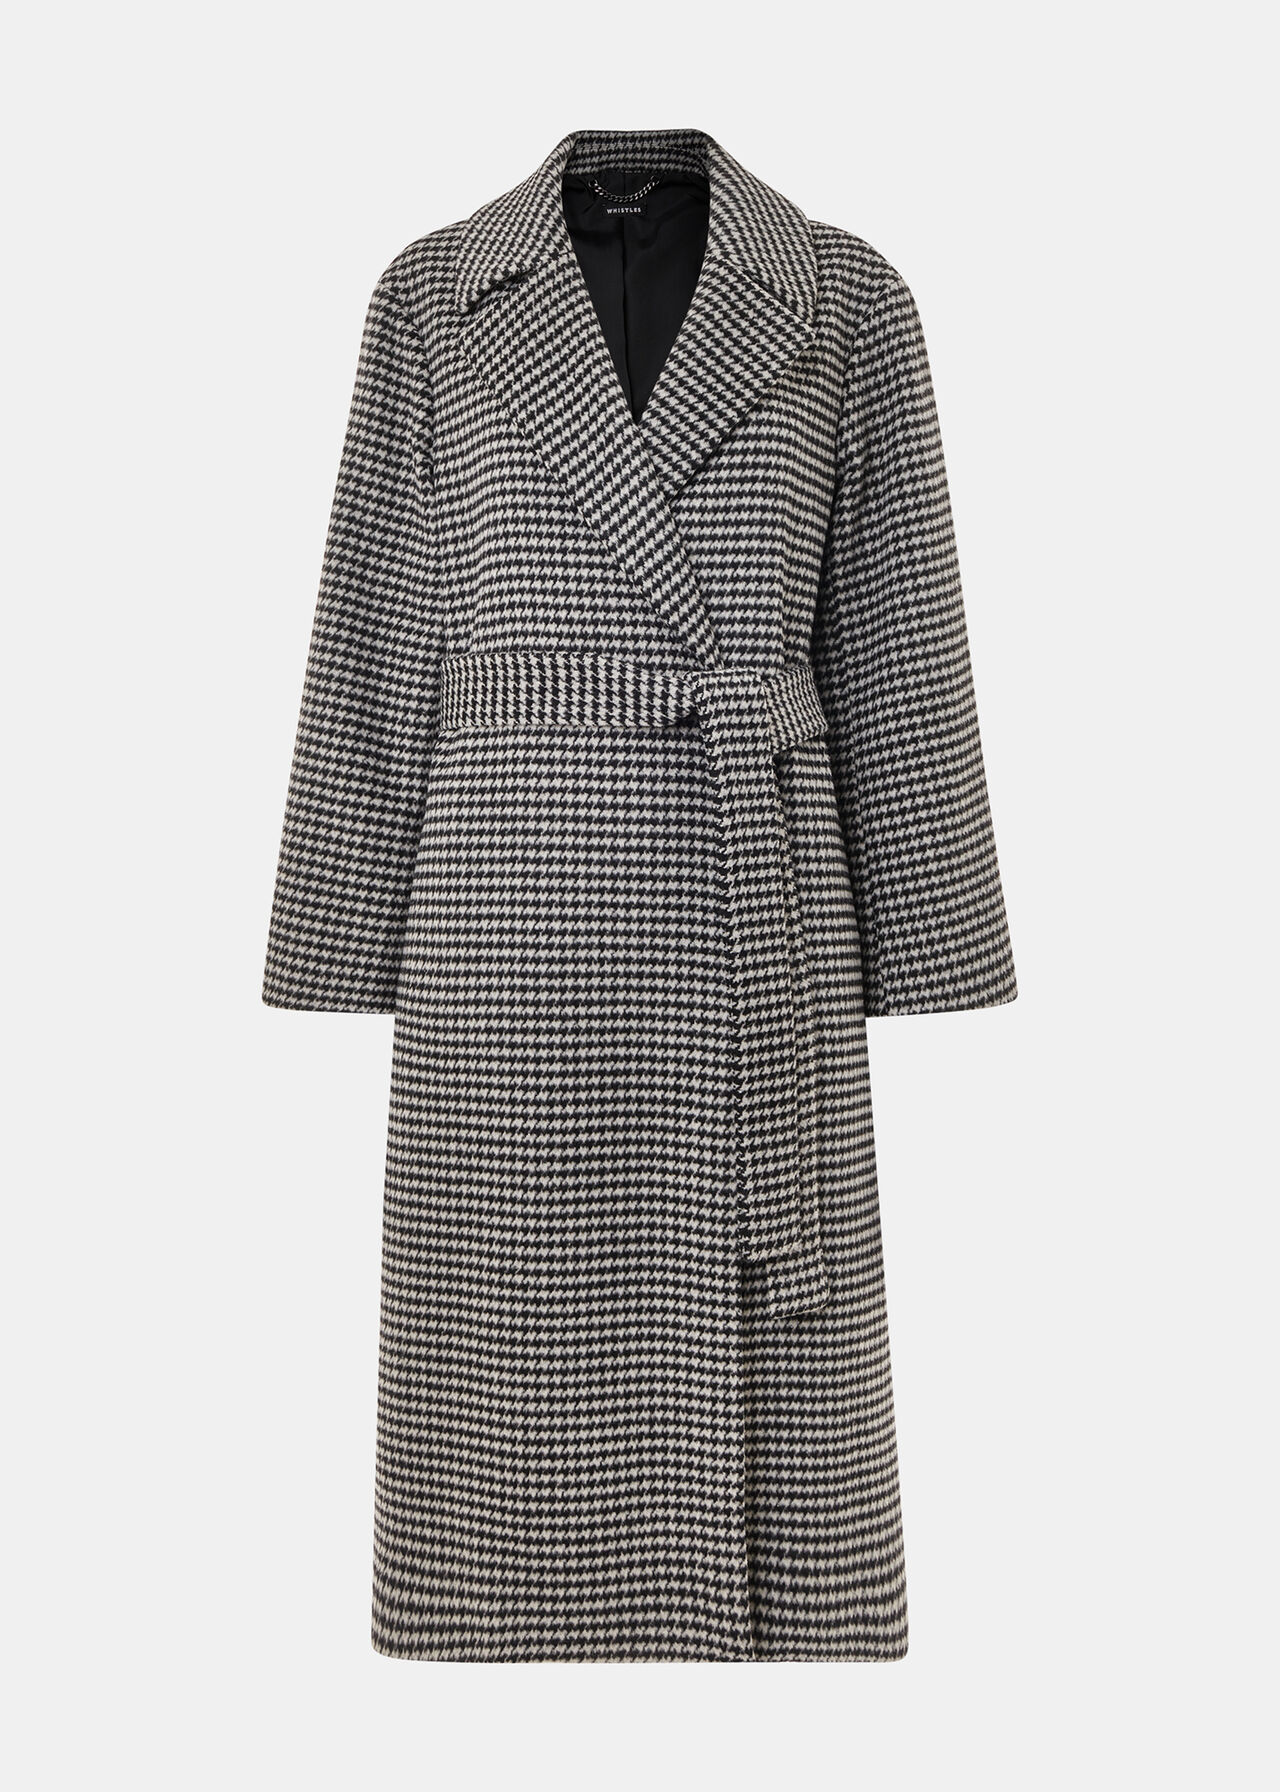 Black & White Houndstooth Belted Wrap Coat | Whistles